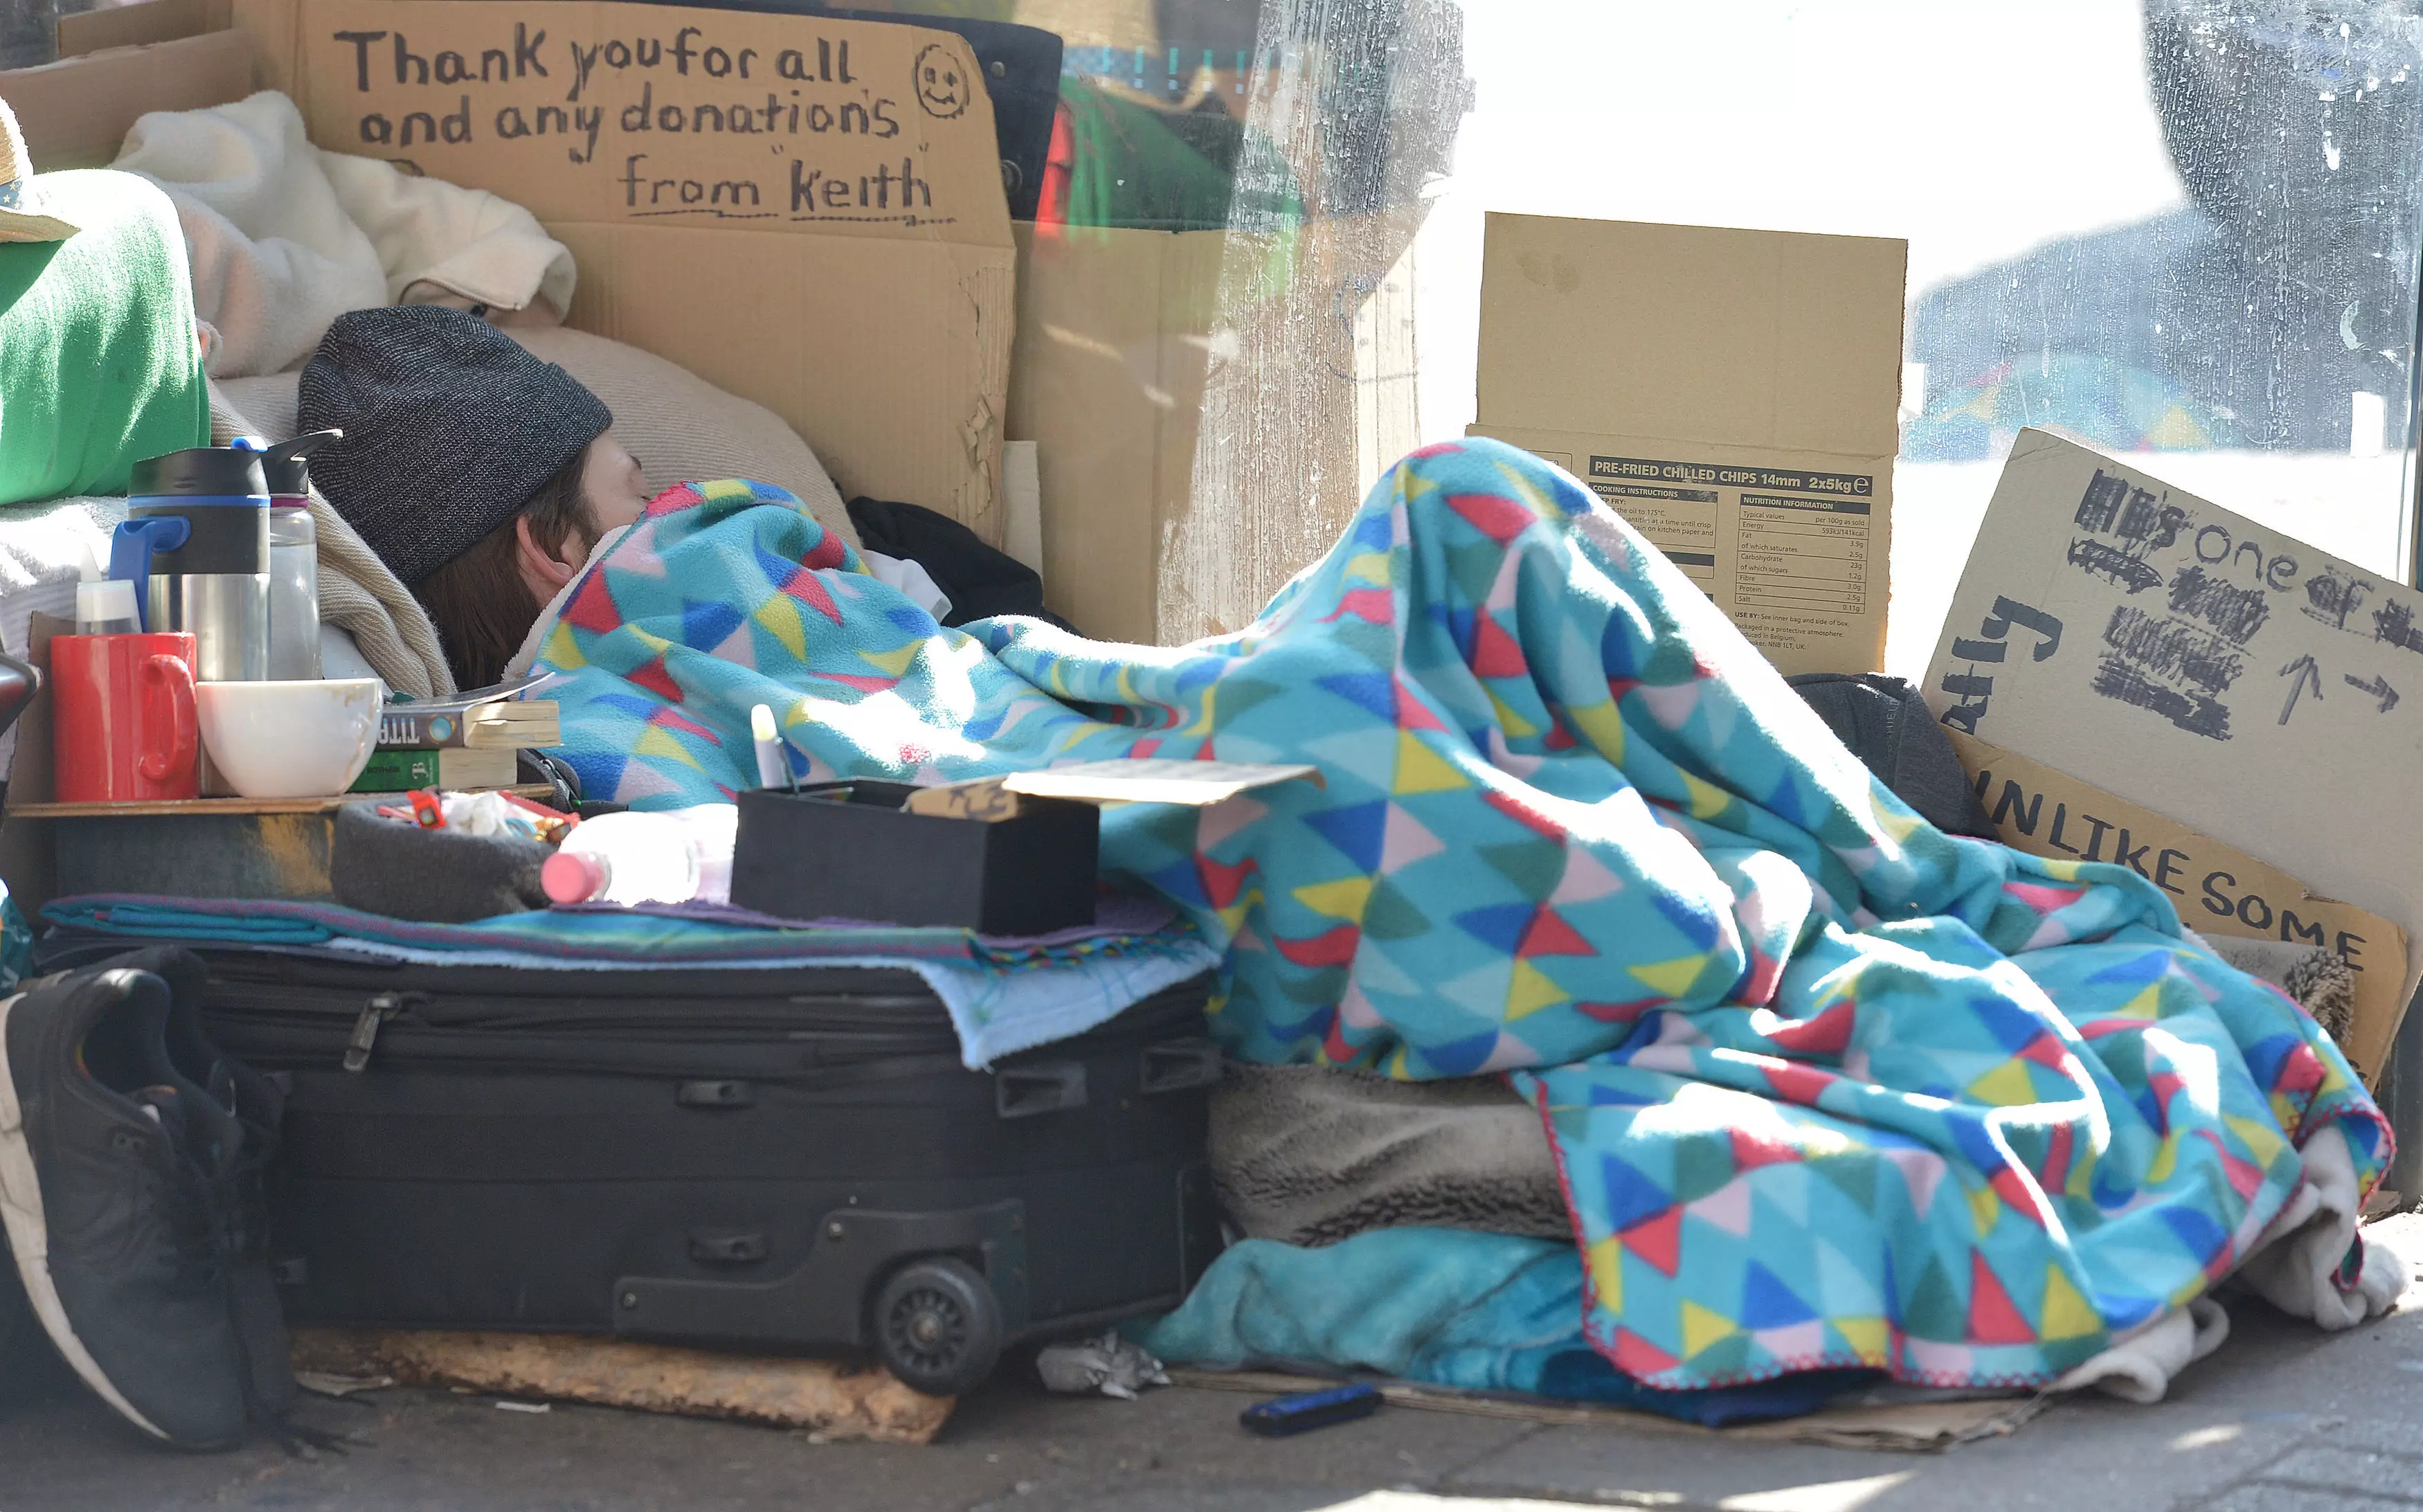 One in 200 people in England is homeless.